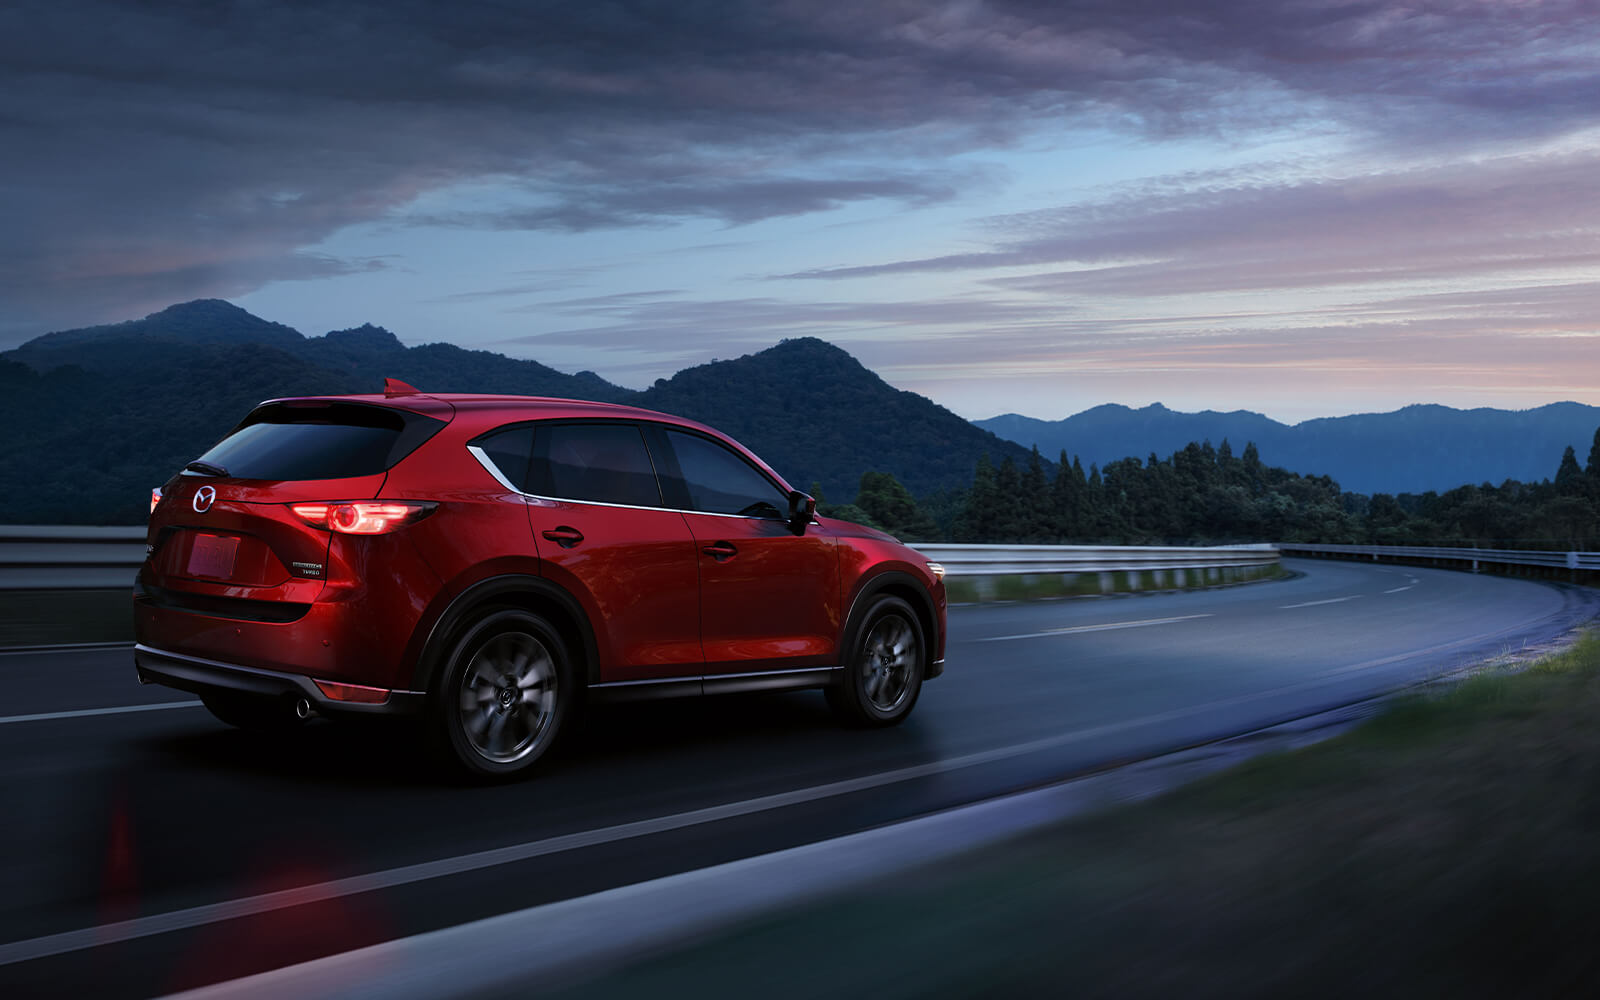 Soul Red Mazda SUV with lights on rounds highway curve at twilight with dark mountains ahead in the distance. 